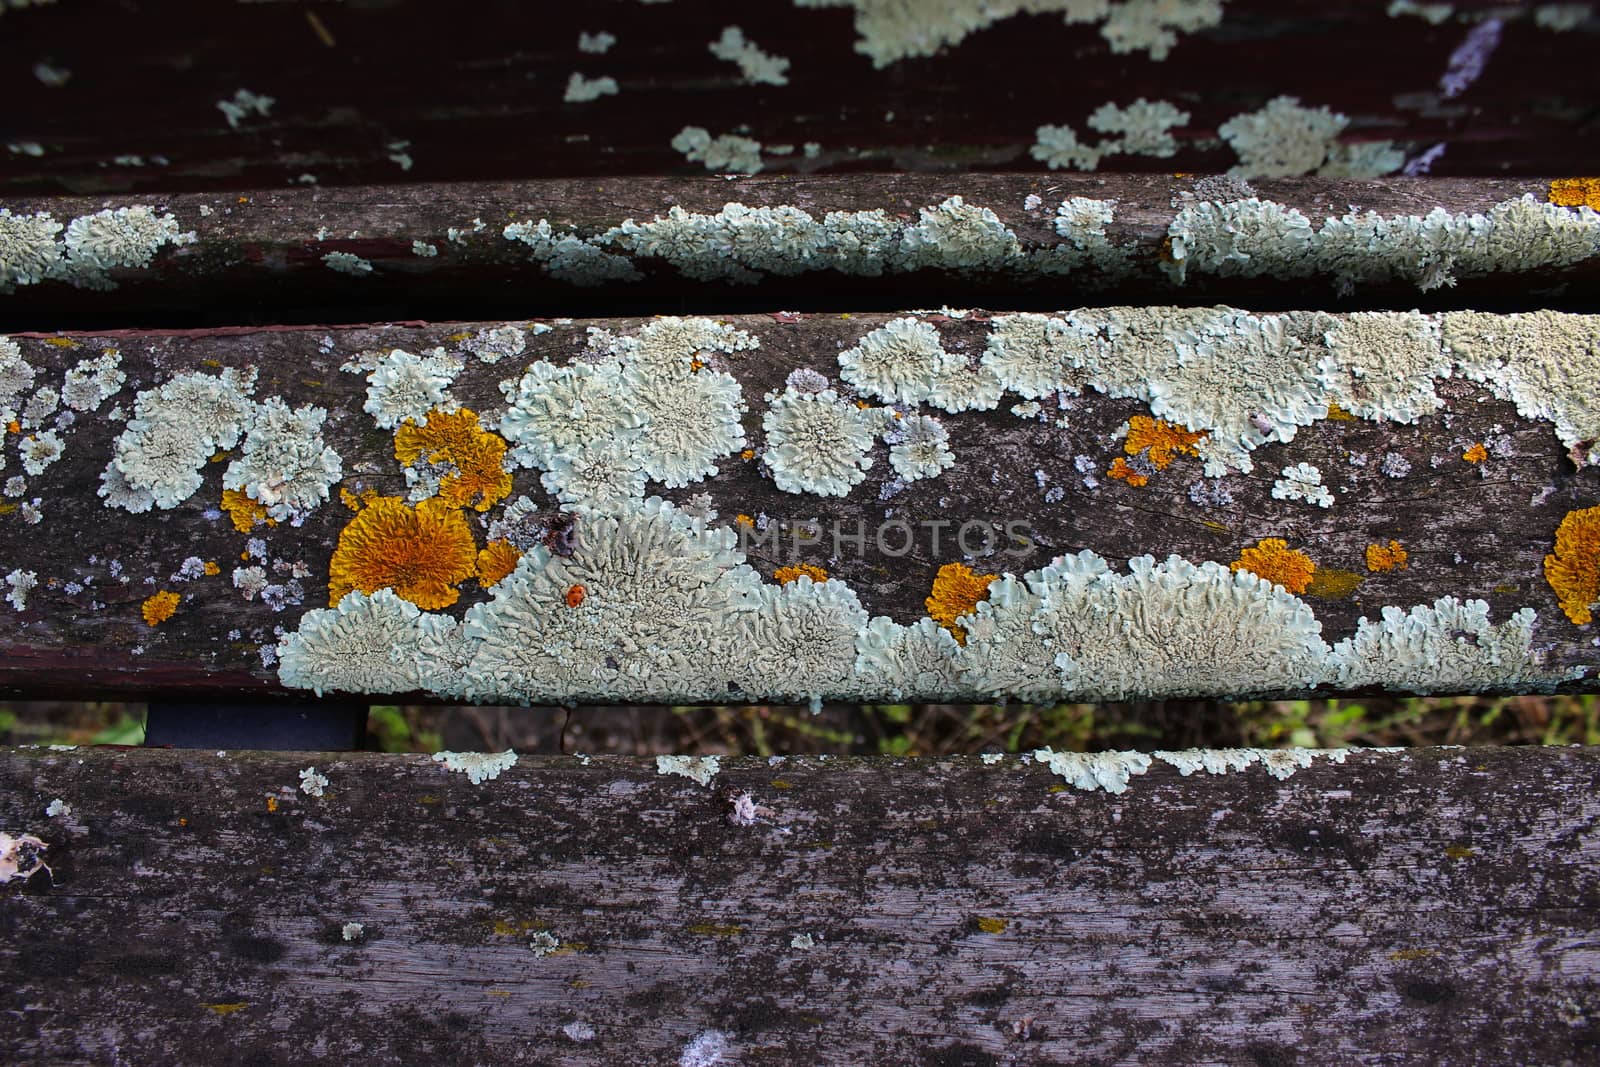 Yellow and white mold on the wooden bench. Beja, Portugal.